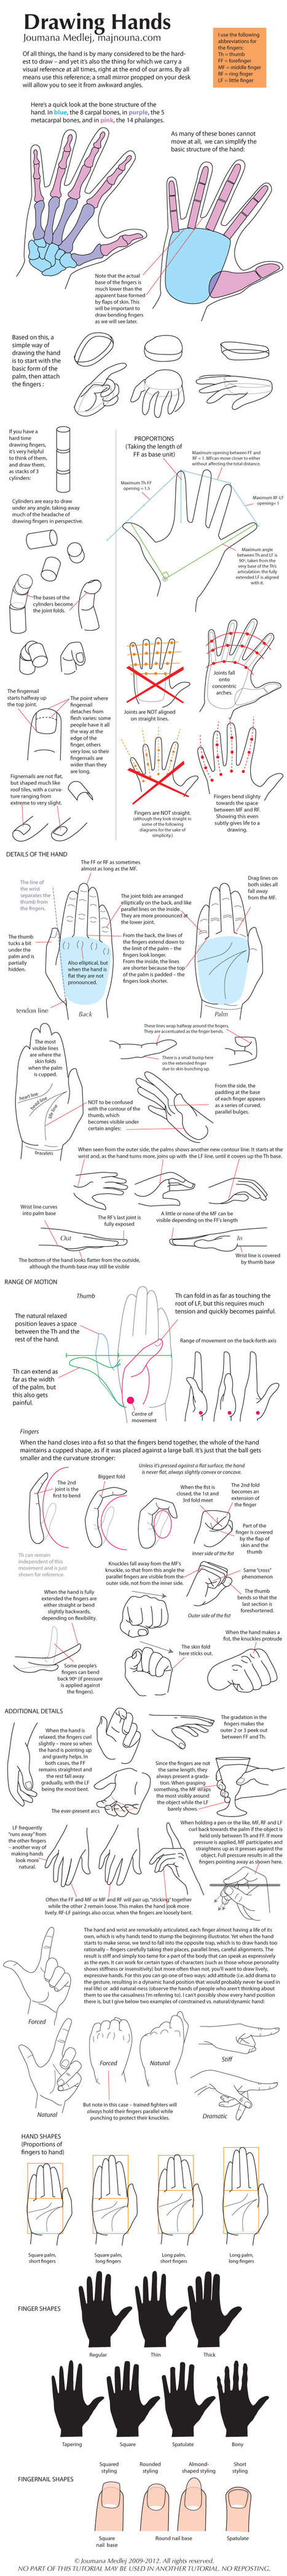 Drawing Hands - Hand Drawing Reference | Drawing References and Resources | Scoop.it